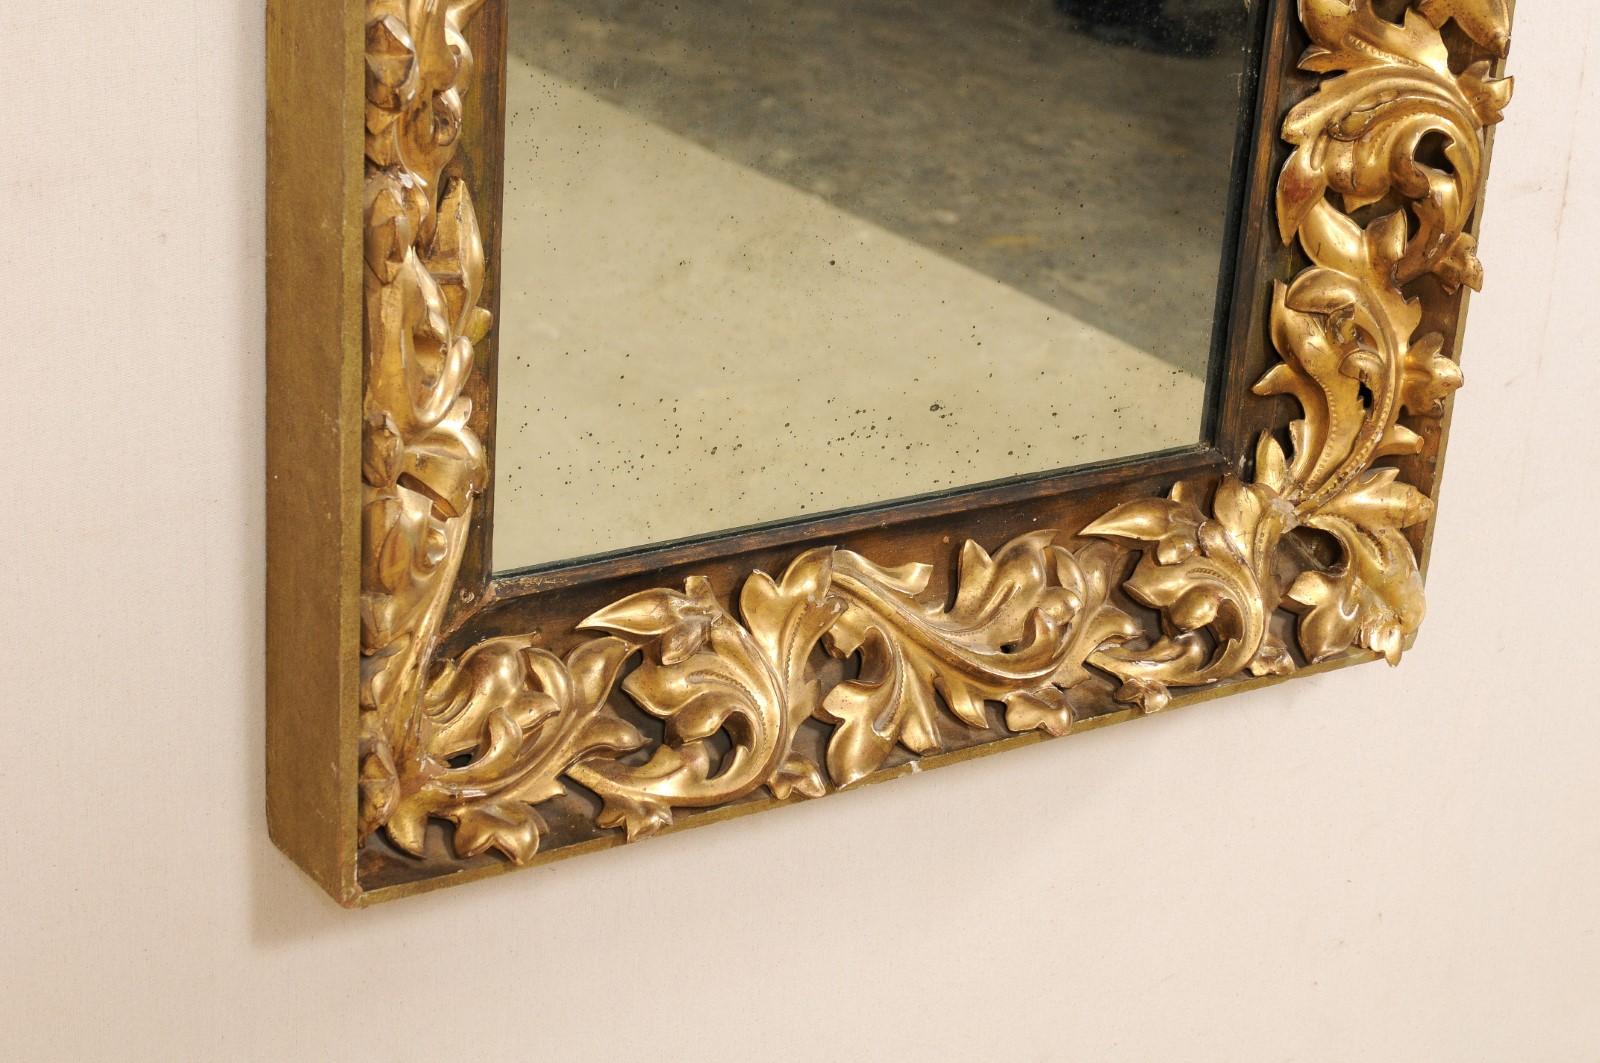 French 19th Century Rectangular-Shaped, Rococo Carved and Giltwood Mirror For Sale 2